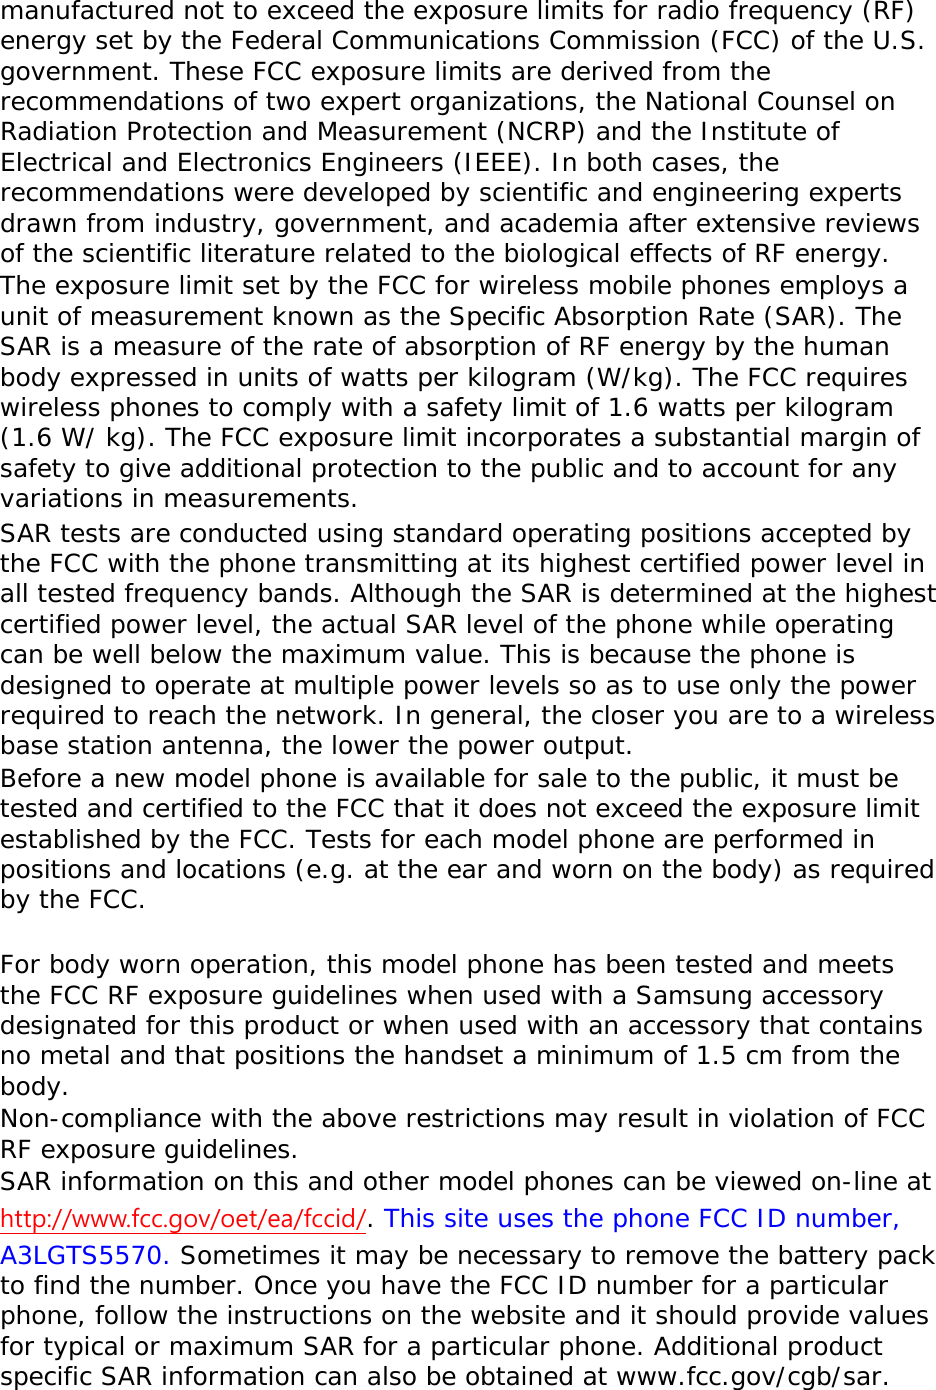 manufactured not to exceed the exposure limits for radio frequency (RF) energy set by the Federal Communications Commission (FCC) of the U.S. government. These FCC exposure limits are derived from the recommendations of two expert organizations, the National Counsel on Radiation Protection and Measurement (NCRP) and the Institute of Electrical and Electronics Engineers (IEEE). In both cases, the recommendations were developed by scientific and engineering experts drawn from industry, government, and academia after extensive reviews of the scientific literature related to the biological effects of RF energy. The exposure limit set by the FCC for wireless mobile phones employs a unit of measurement known as the Specific Absorption Rate (SAR). The SAR is a measure of the rate of absorption of RF energy by the human body expressed in units of watts per kilogram (W/kg). The FCC requires wireless phones to comply with a safety limit of 1.6 watts per kilogram (1.6 W/ kg). The FCC exposure limit incorporates a substantial margin of safety to give additional protection to the public and to account for any variations in measurements. SAR tests are conducted using standard operating positions accepted by the FCC with the phone transmitting at its highest certified power level in all tested frequency bands. Although the SAR is determined at the highest certified power level, the actual SAR level of the phone while operating can be well below the maximum value. This is because the phone is designed to operate at multiple power levels so as to use only the power required to reach the network. In general, the closer you are to a wireless base station antenna, the lower the power output. Before a new model phone is available for sale to the public, it must be tested and certified to the FCC that it does not exceed the exposure limit established by the FCC. Tests for each model phone are performed in positions and locations (e.g. at the ear and worn on the body) as required by the FCC.    For body worn operation, this model phone has been tested and meets the FCC RF exposure guidelines when used with a Samsung accessory designated for this product or when used with an accessory that contains no metal and that positions the handset a minimum of 1.5 cm from the body.  Non-compliance with the above restrictions may result in violation of FCC RF exposure guidelines. SAR information on this and other model phones can be viewed on-line at http://www.fcc.gov/oet/ea/fccid/. This site uses the phone FCC ID number, A3LGTS5570. Sometimes it may be necessary to remove the battery pack to find the number. Once you have the FCC ID number for a particular phone, follow the instructions on the website and it should provide values for typical or maximum SAR for a particular phone. Additional product specific SAR information can also be obtained at www.fcc.gov/cgb/sar. 